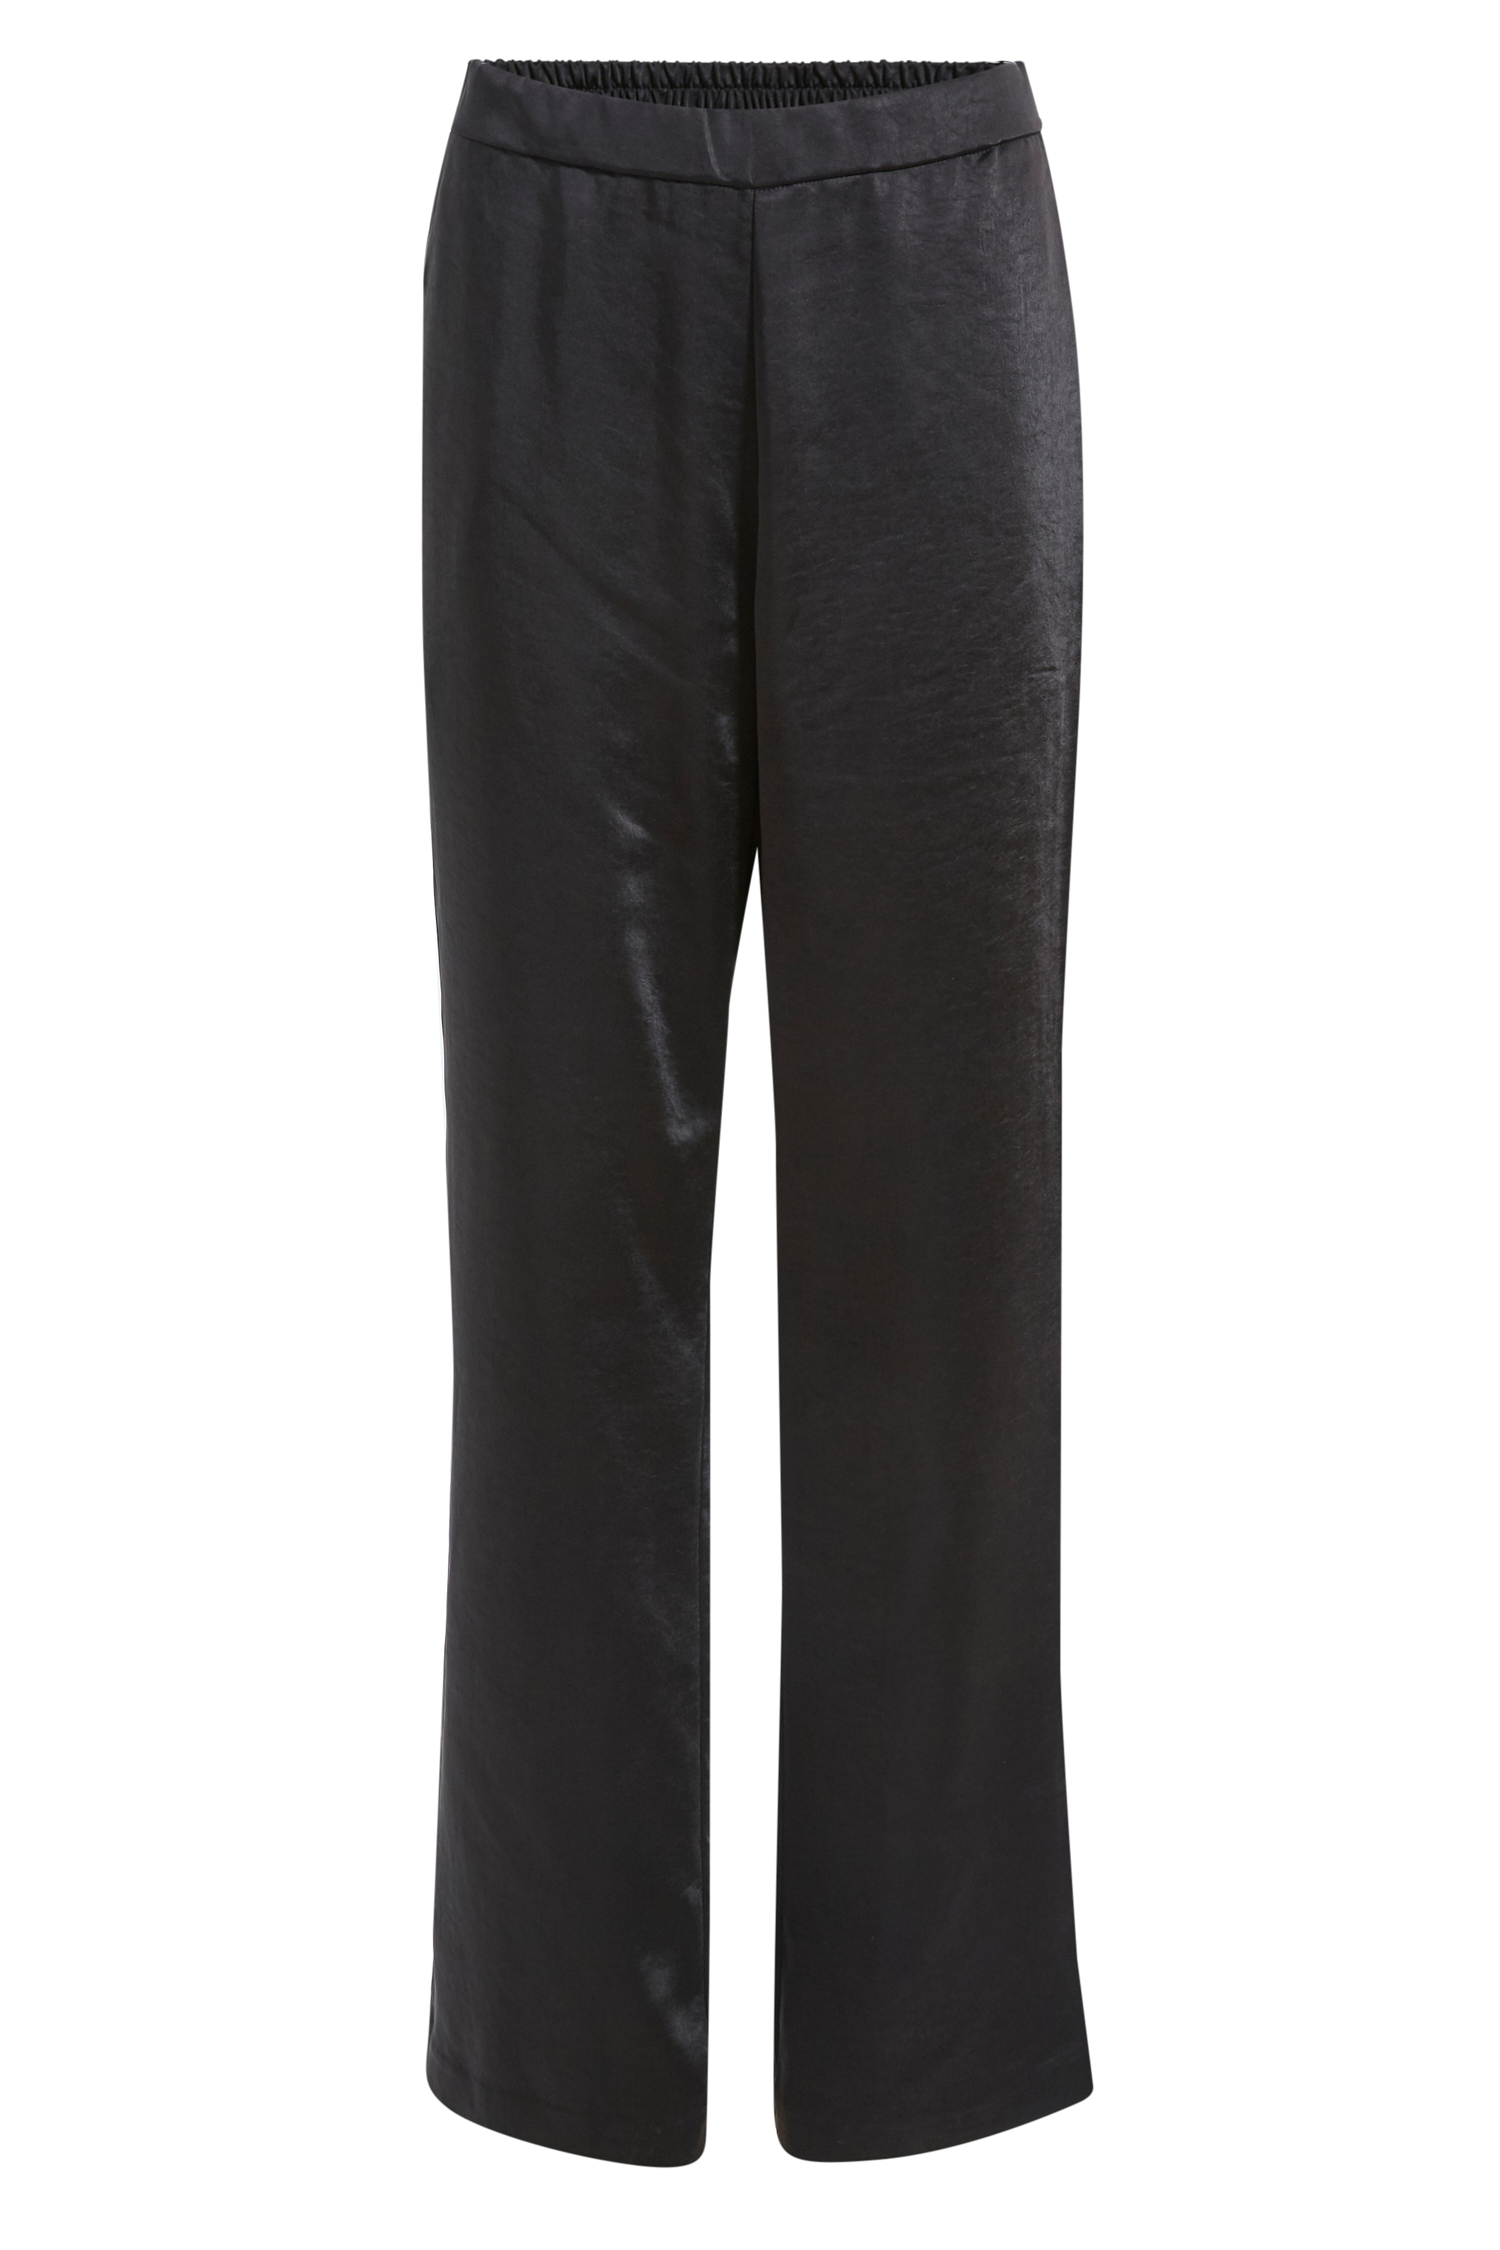 Skies are Blue Satin Elastic Back Trousers